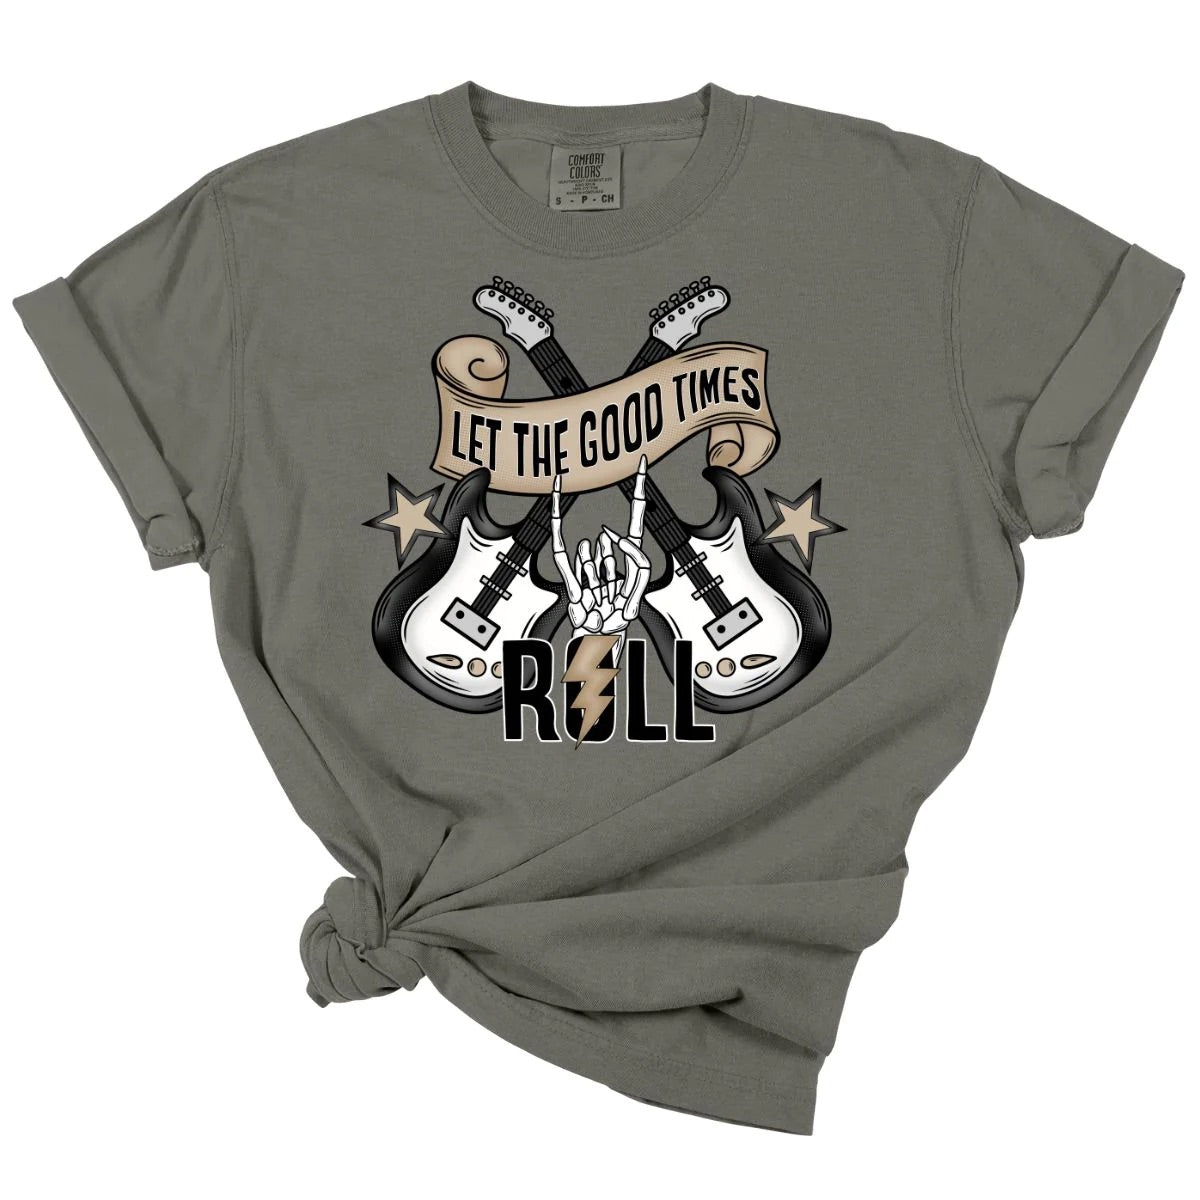 Let The Good Times Roll Tee *MADE TO ORDER*